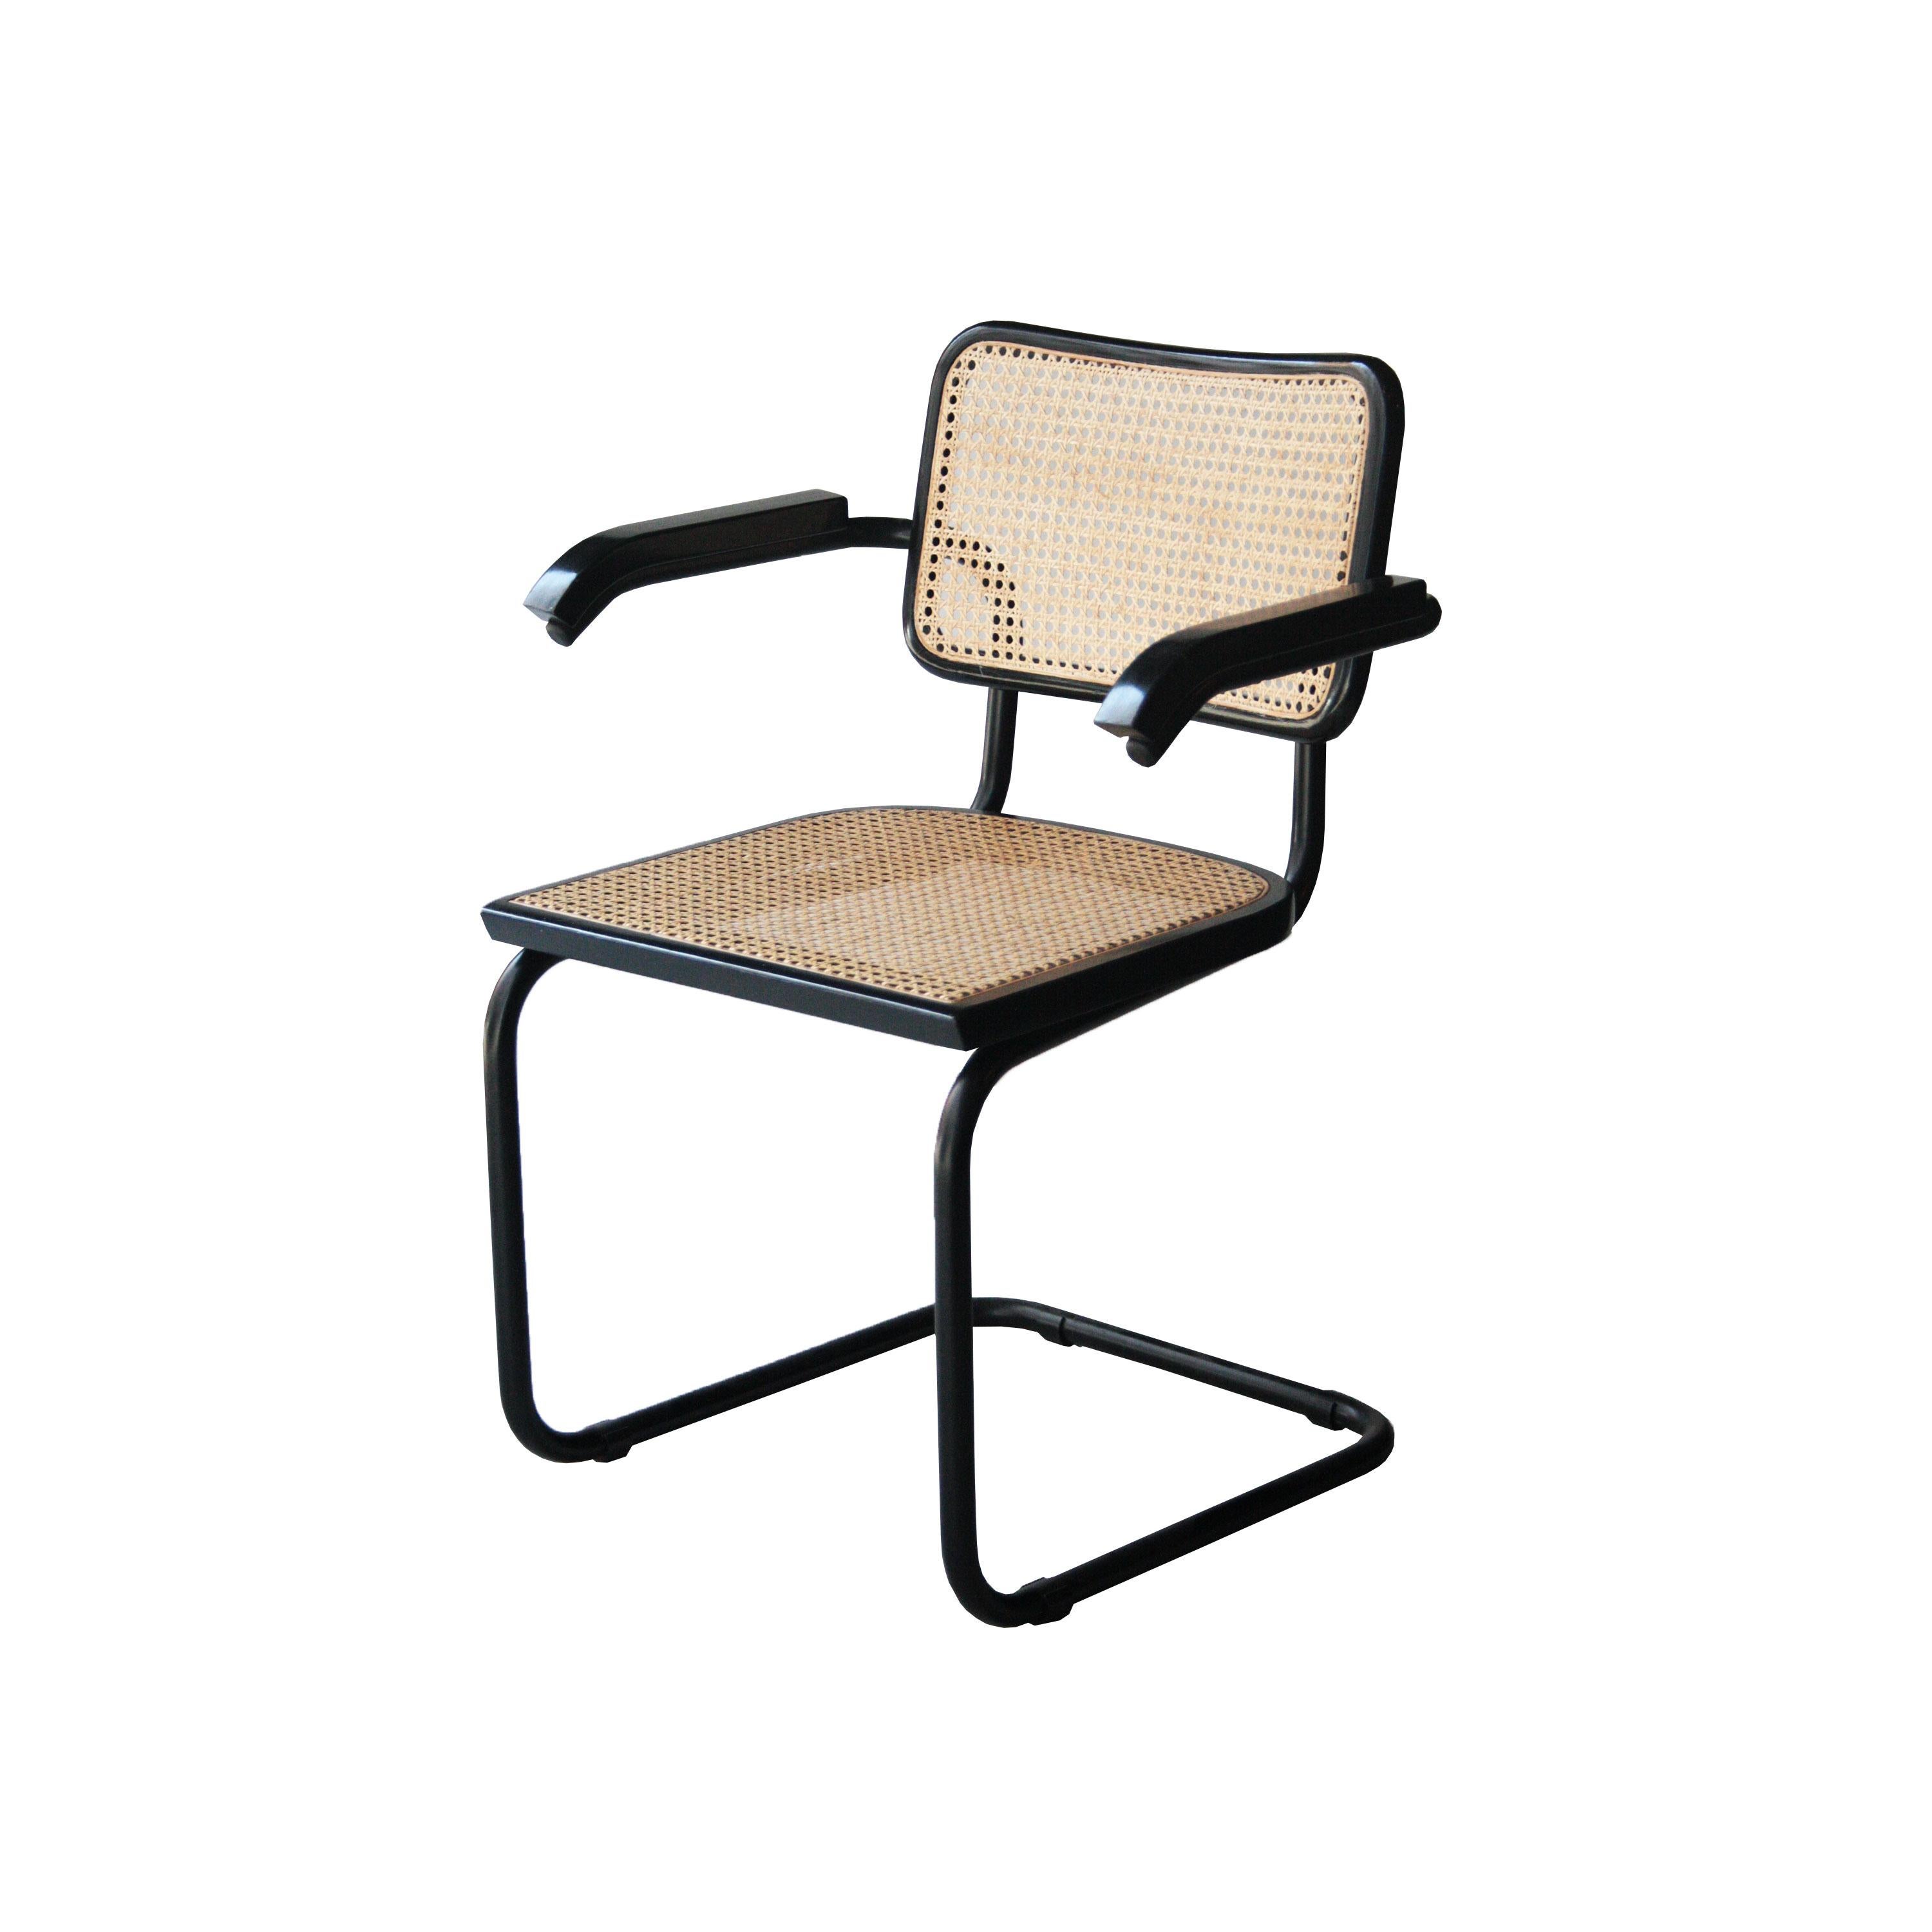 Chairs model B64, Cesca designed by Marcel Breuer (1902-1981). With structure made of tubular steel lacquered in black, seat and back in wicker and wood lacquered in black. German design originated in 1927 and produced by Gavina in Italy from 1962.